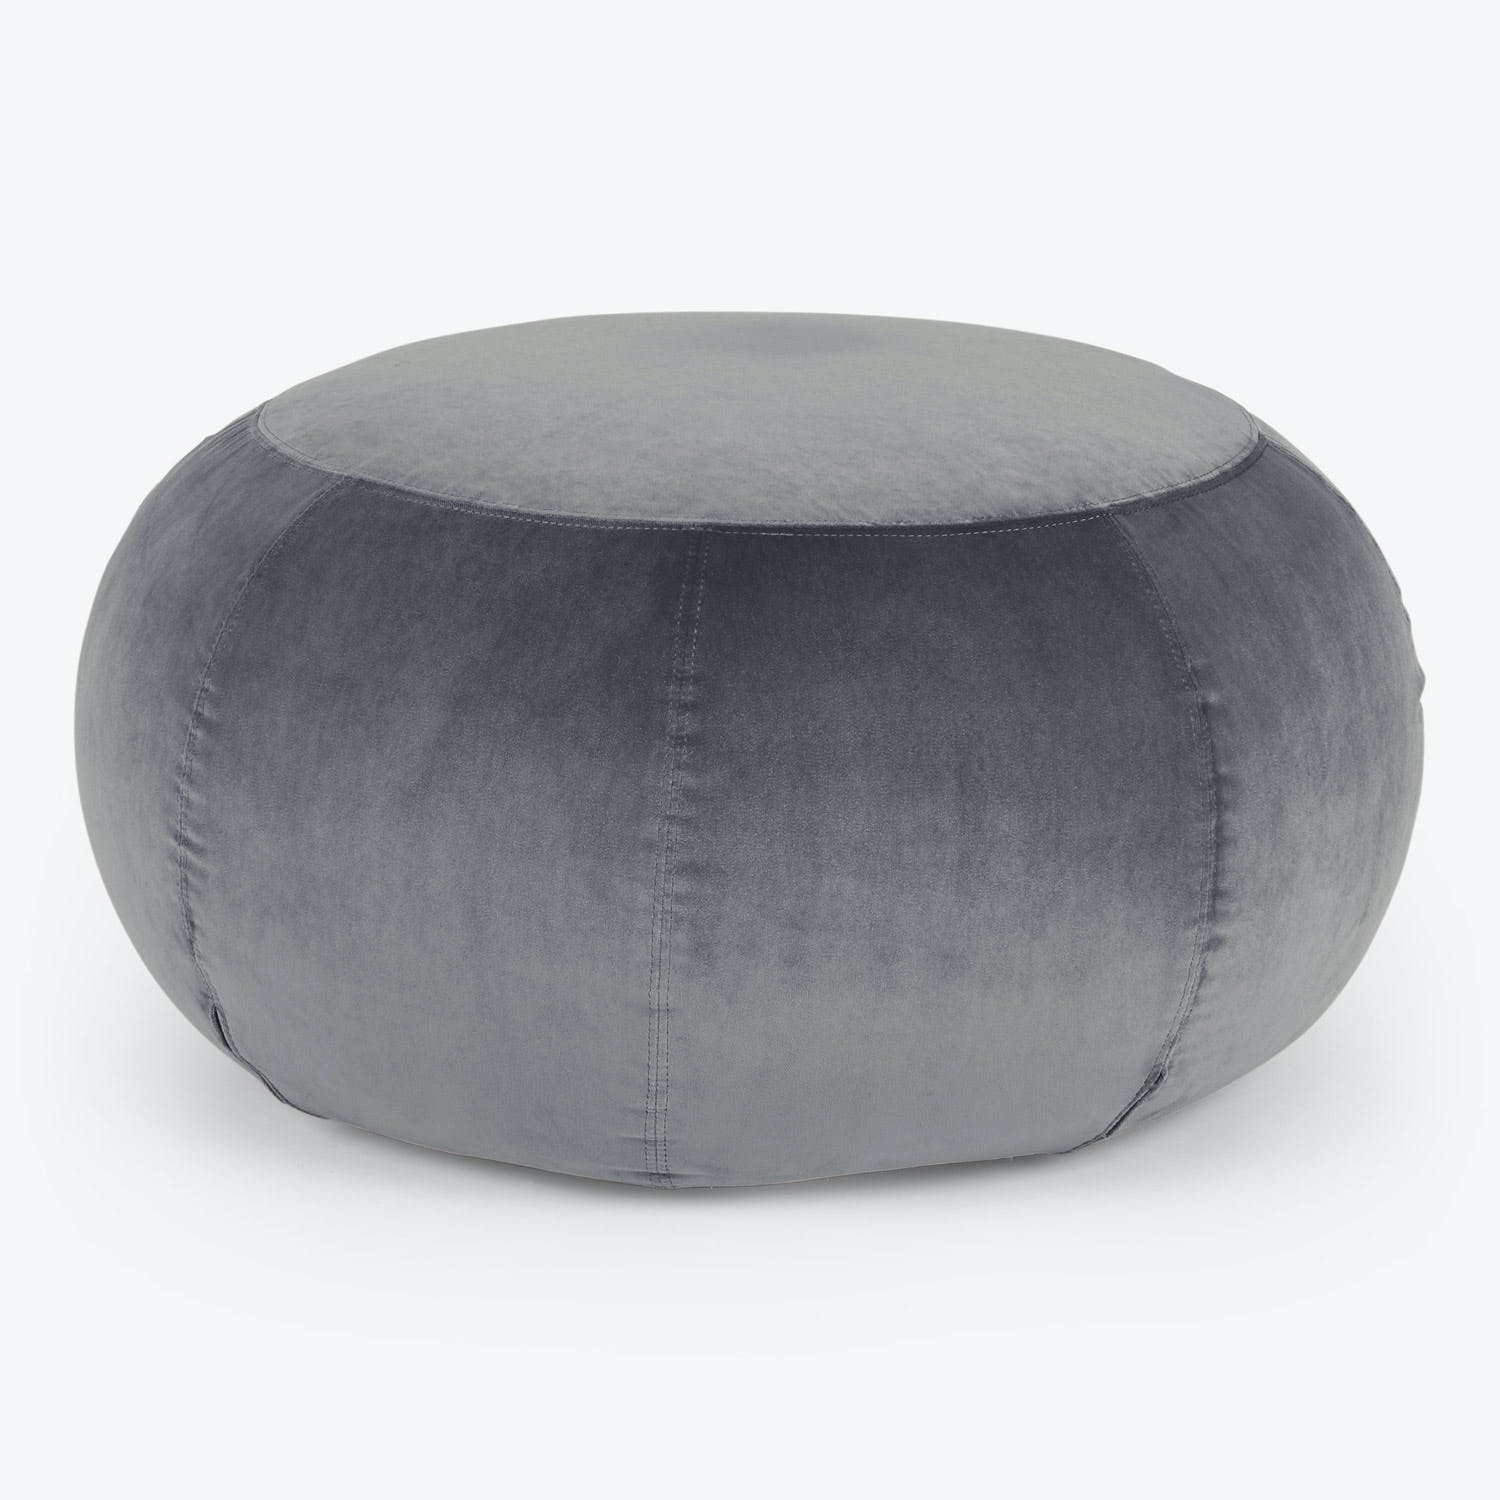 Grey velvet upholstered round pouf with visible stitching for seating